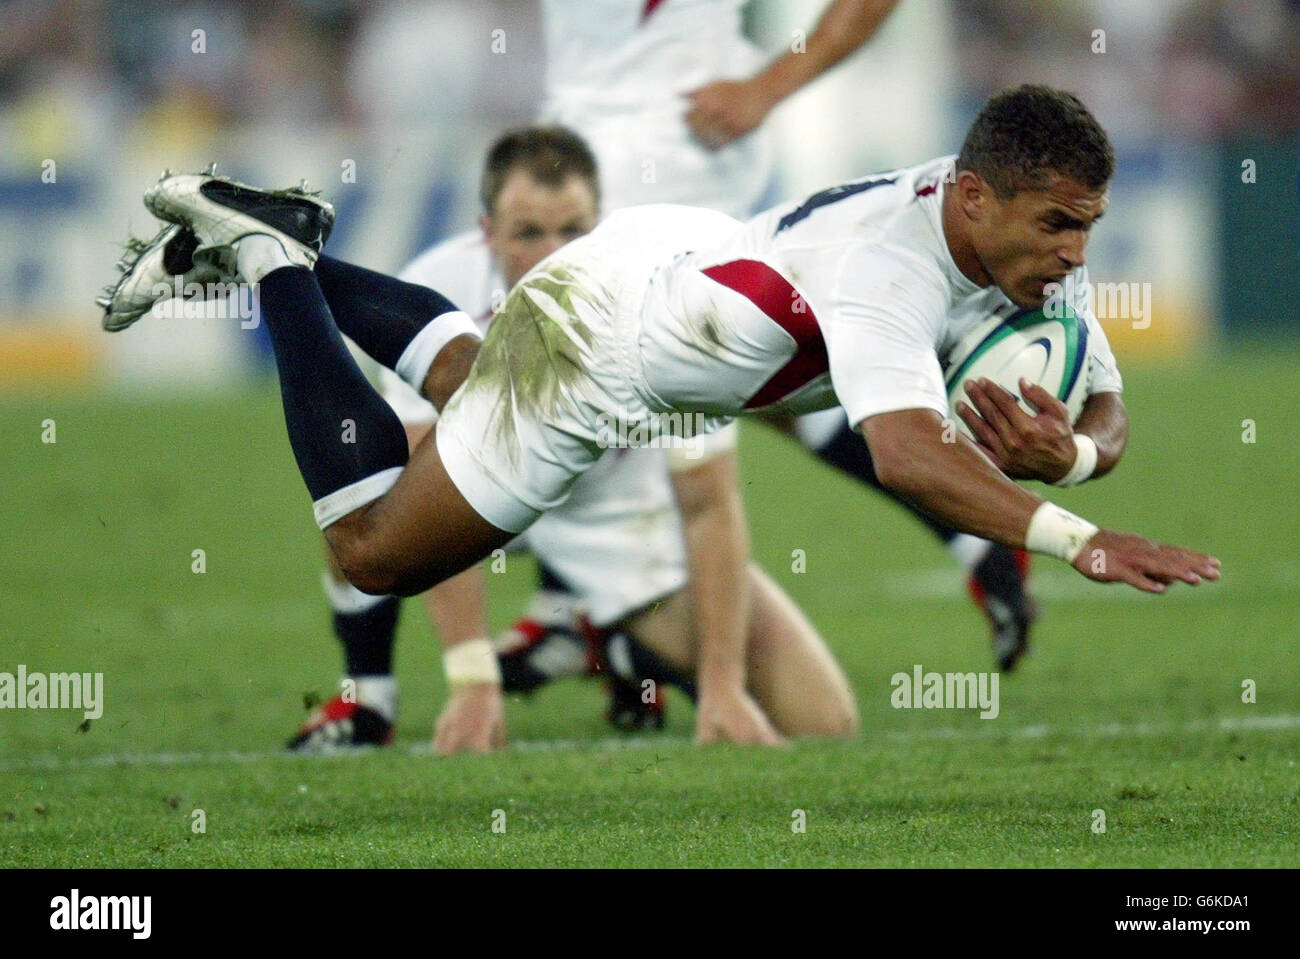 Jason Robinson during England's 24-7 victory over France in the Rugby World Cup semi-final at the Telstra Stadium in Sydney. England boss Clive Woodward has said that he will put the emphasis on light training this week as his players prepare for next Saturday's World Cup final against Australia. Stock Photo